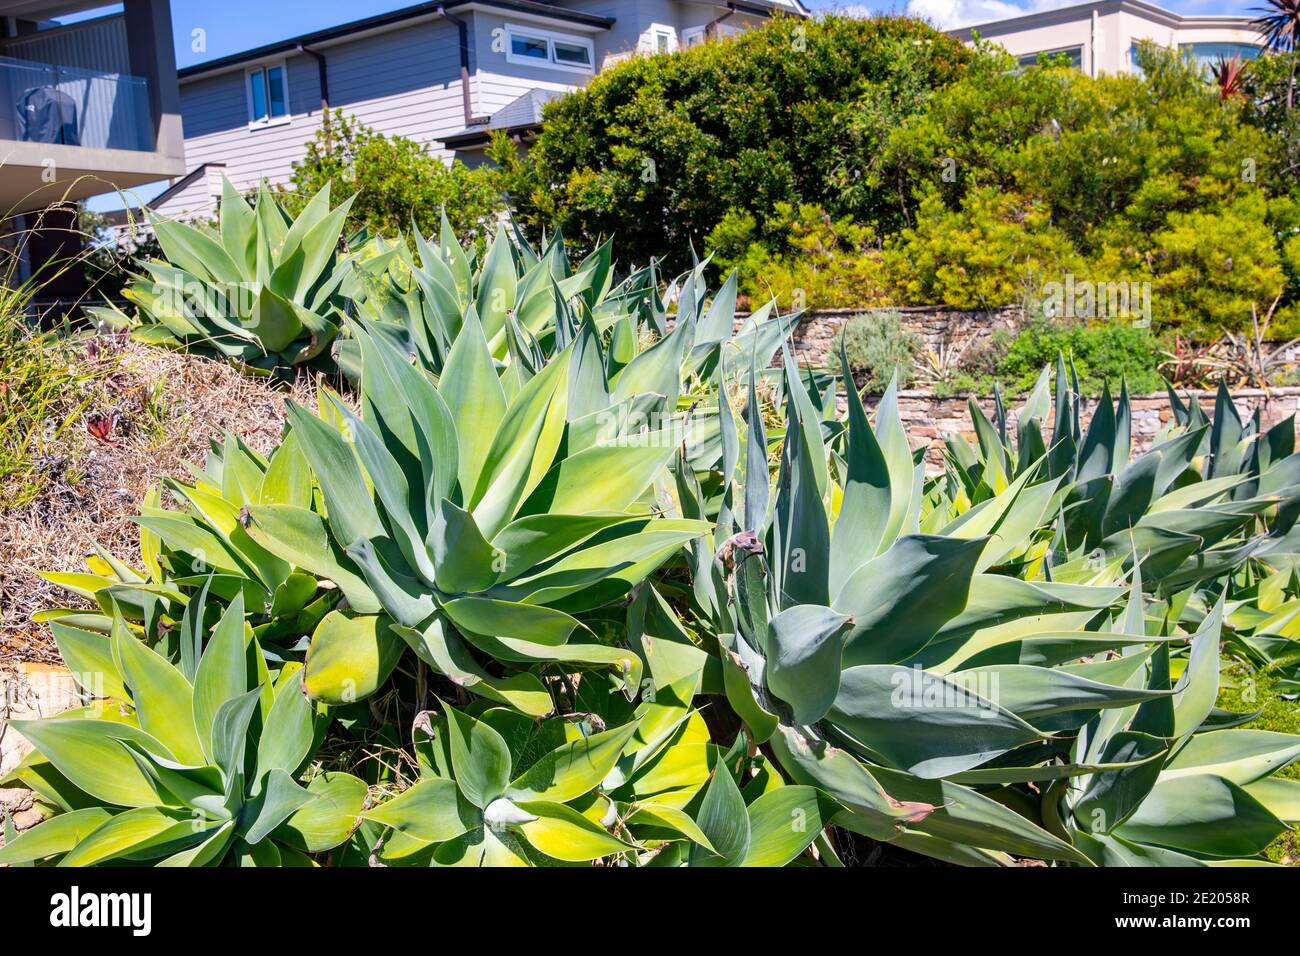 Sydney garden with agave attenuata plants on a summers day,Sydney,Australia Stock Photo